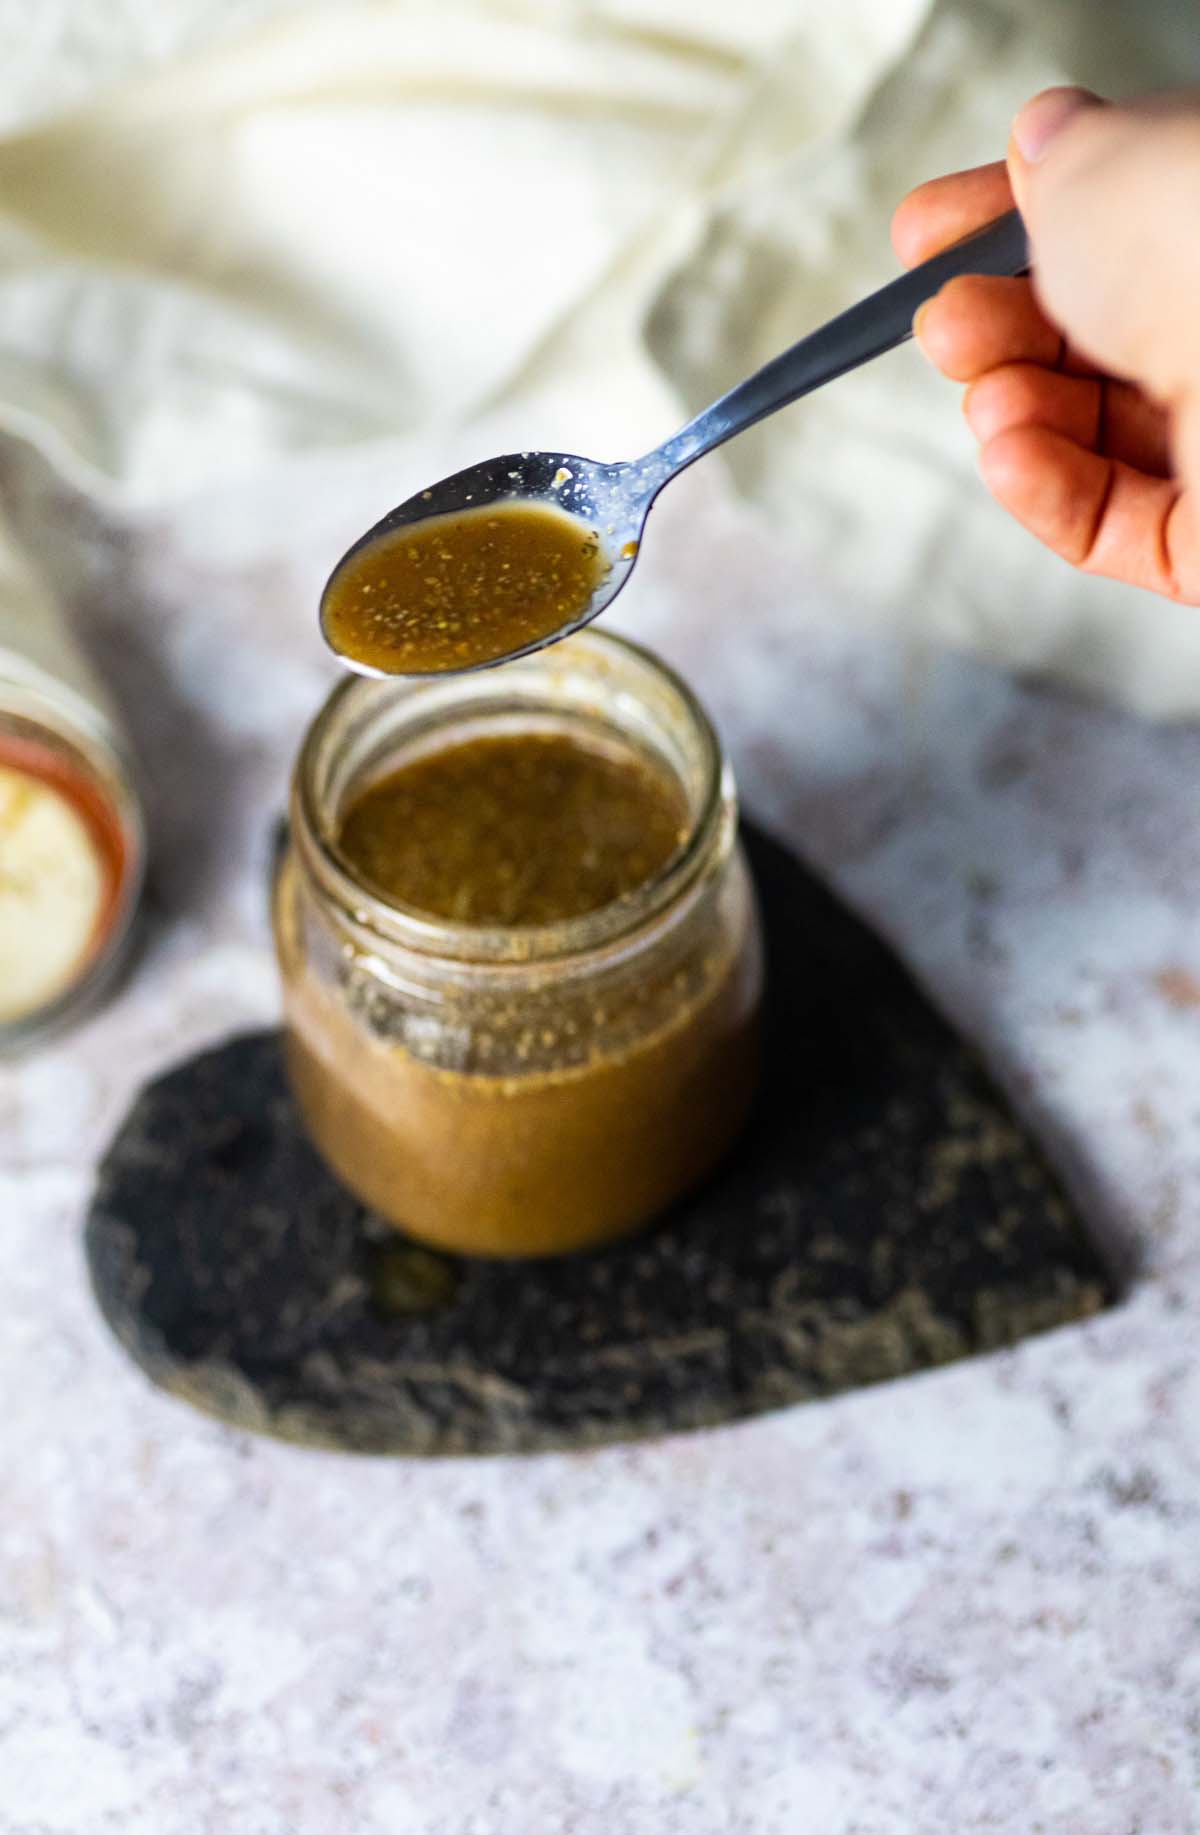 Holding a spoon with oil free balsamic dressing over a balsamic vinaigrette jar